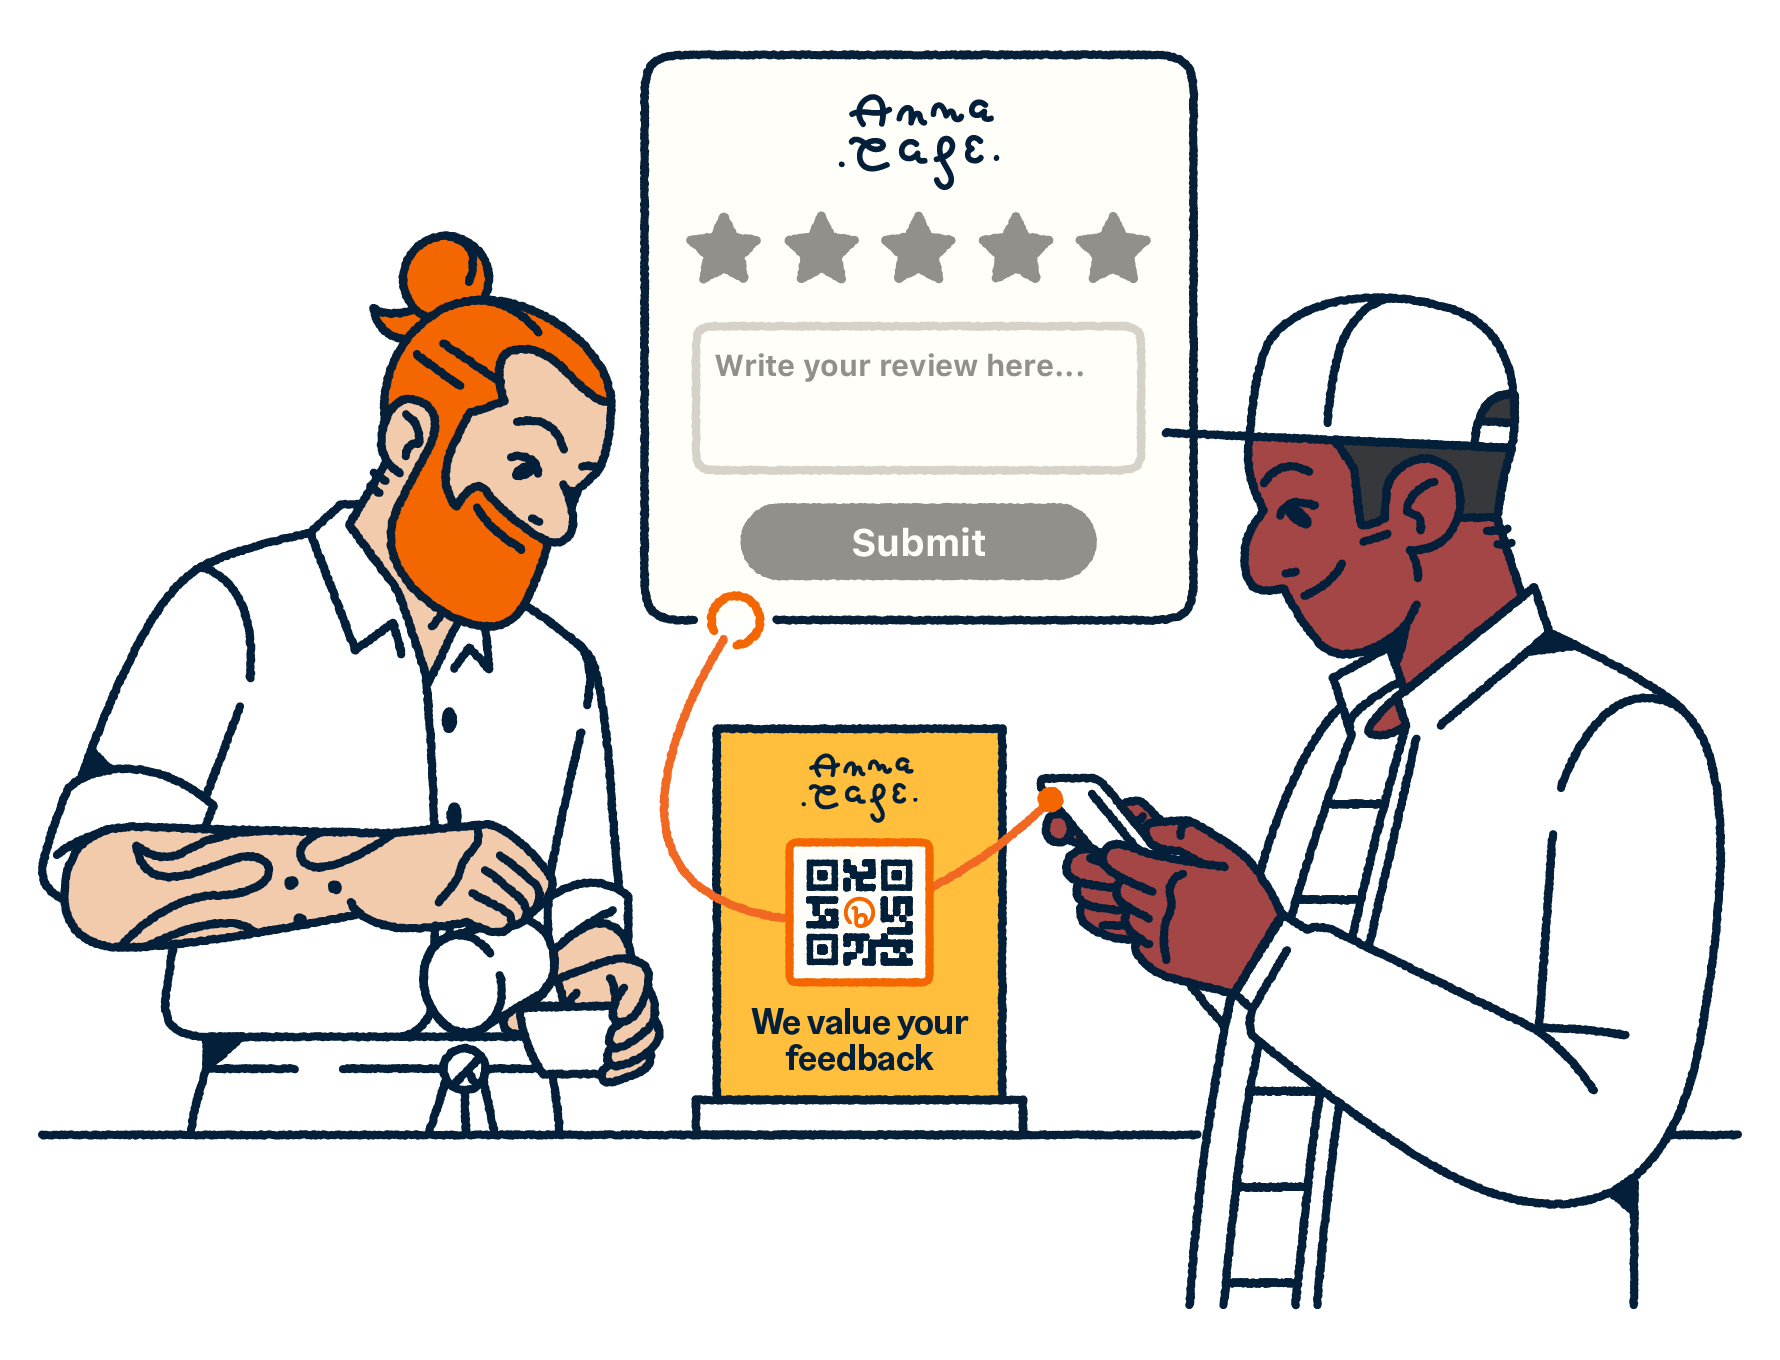 Barista making coffee and a customer scanning a QR code to leave a review of the cafe.